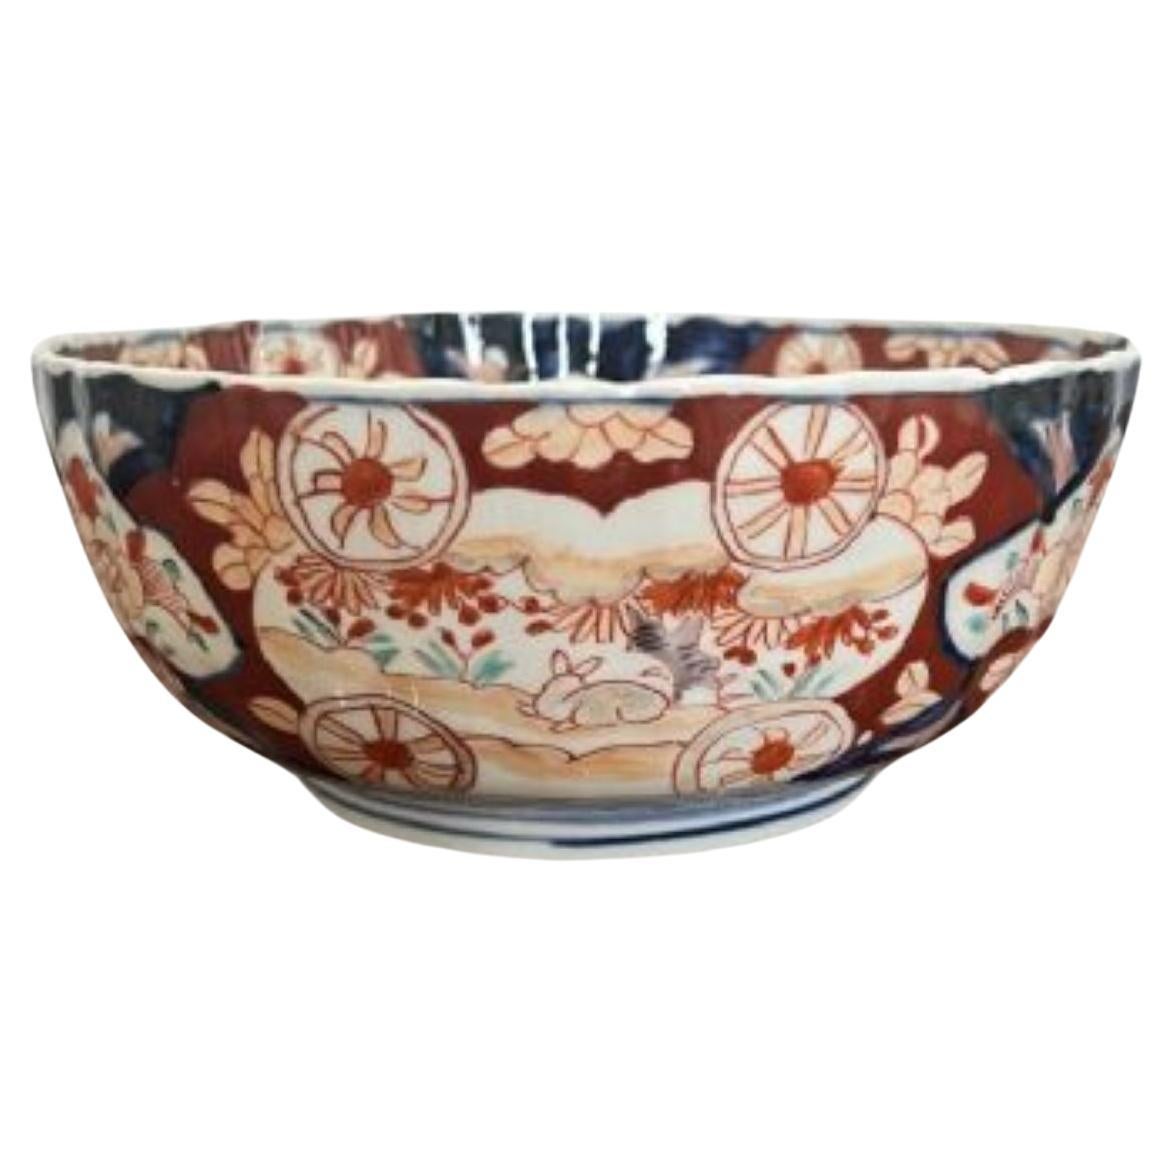 Lovely antique Japanese imari bowl with a scallop shaped edge For Sale